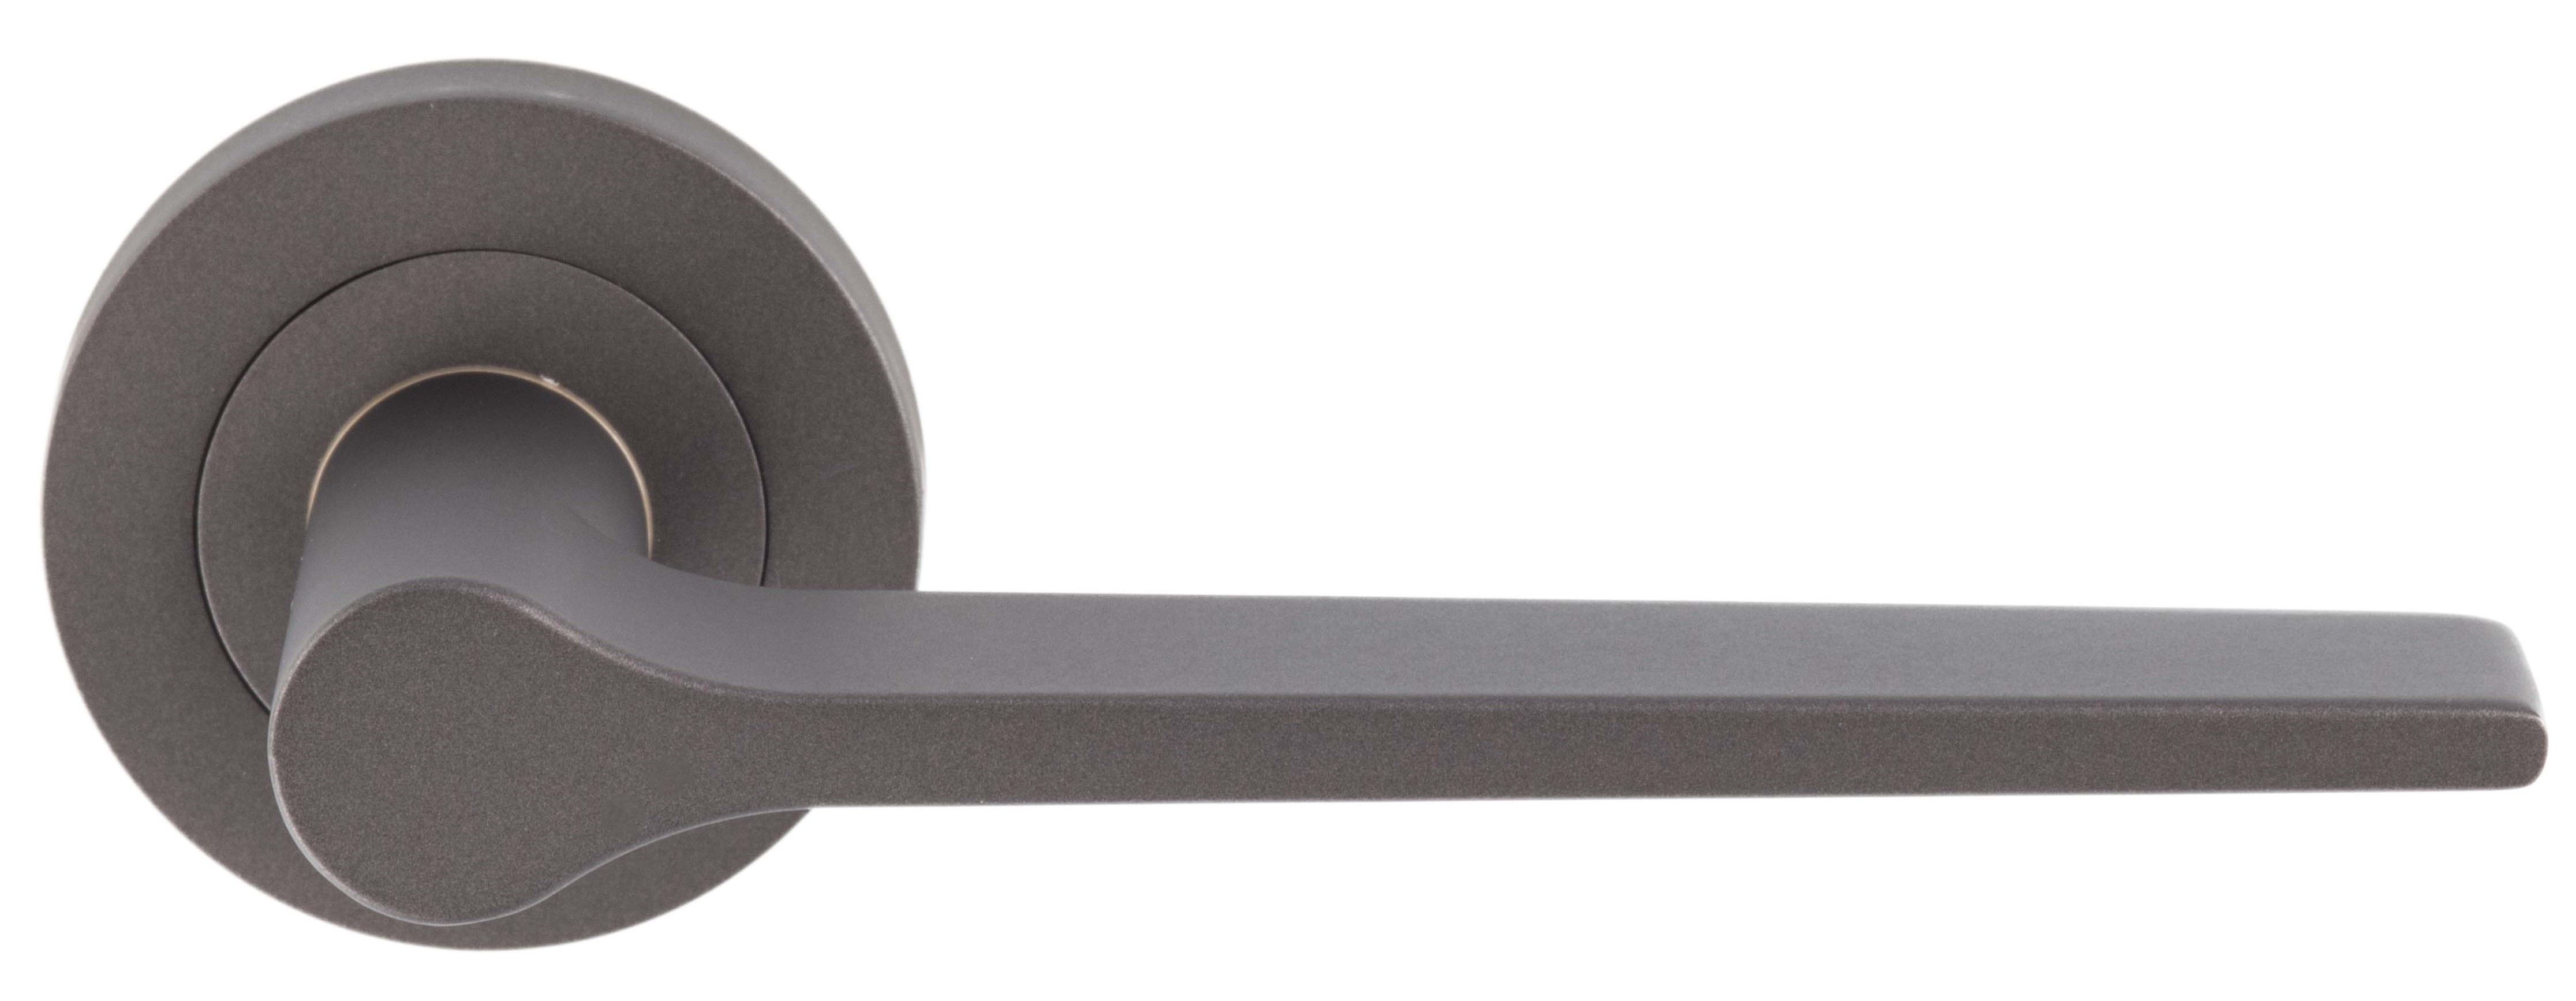 Tapered Design Lever Door Handles With Round Rose - Satin Brass (Lacquered)  - Suitable For Use With FD30 / FD60 Fire Doors